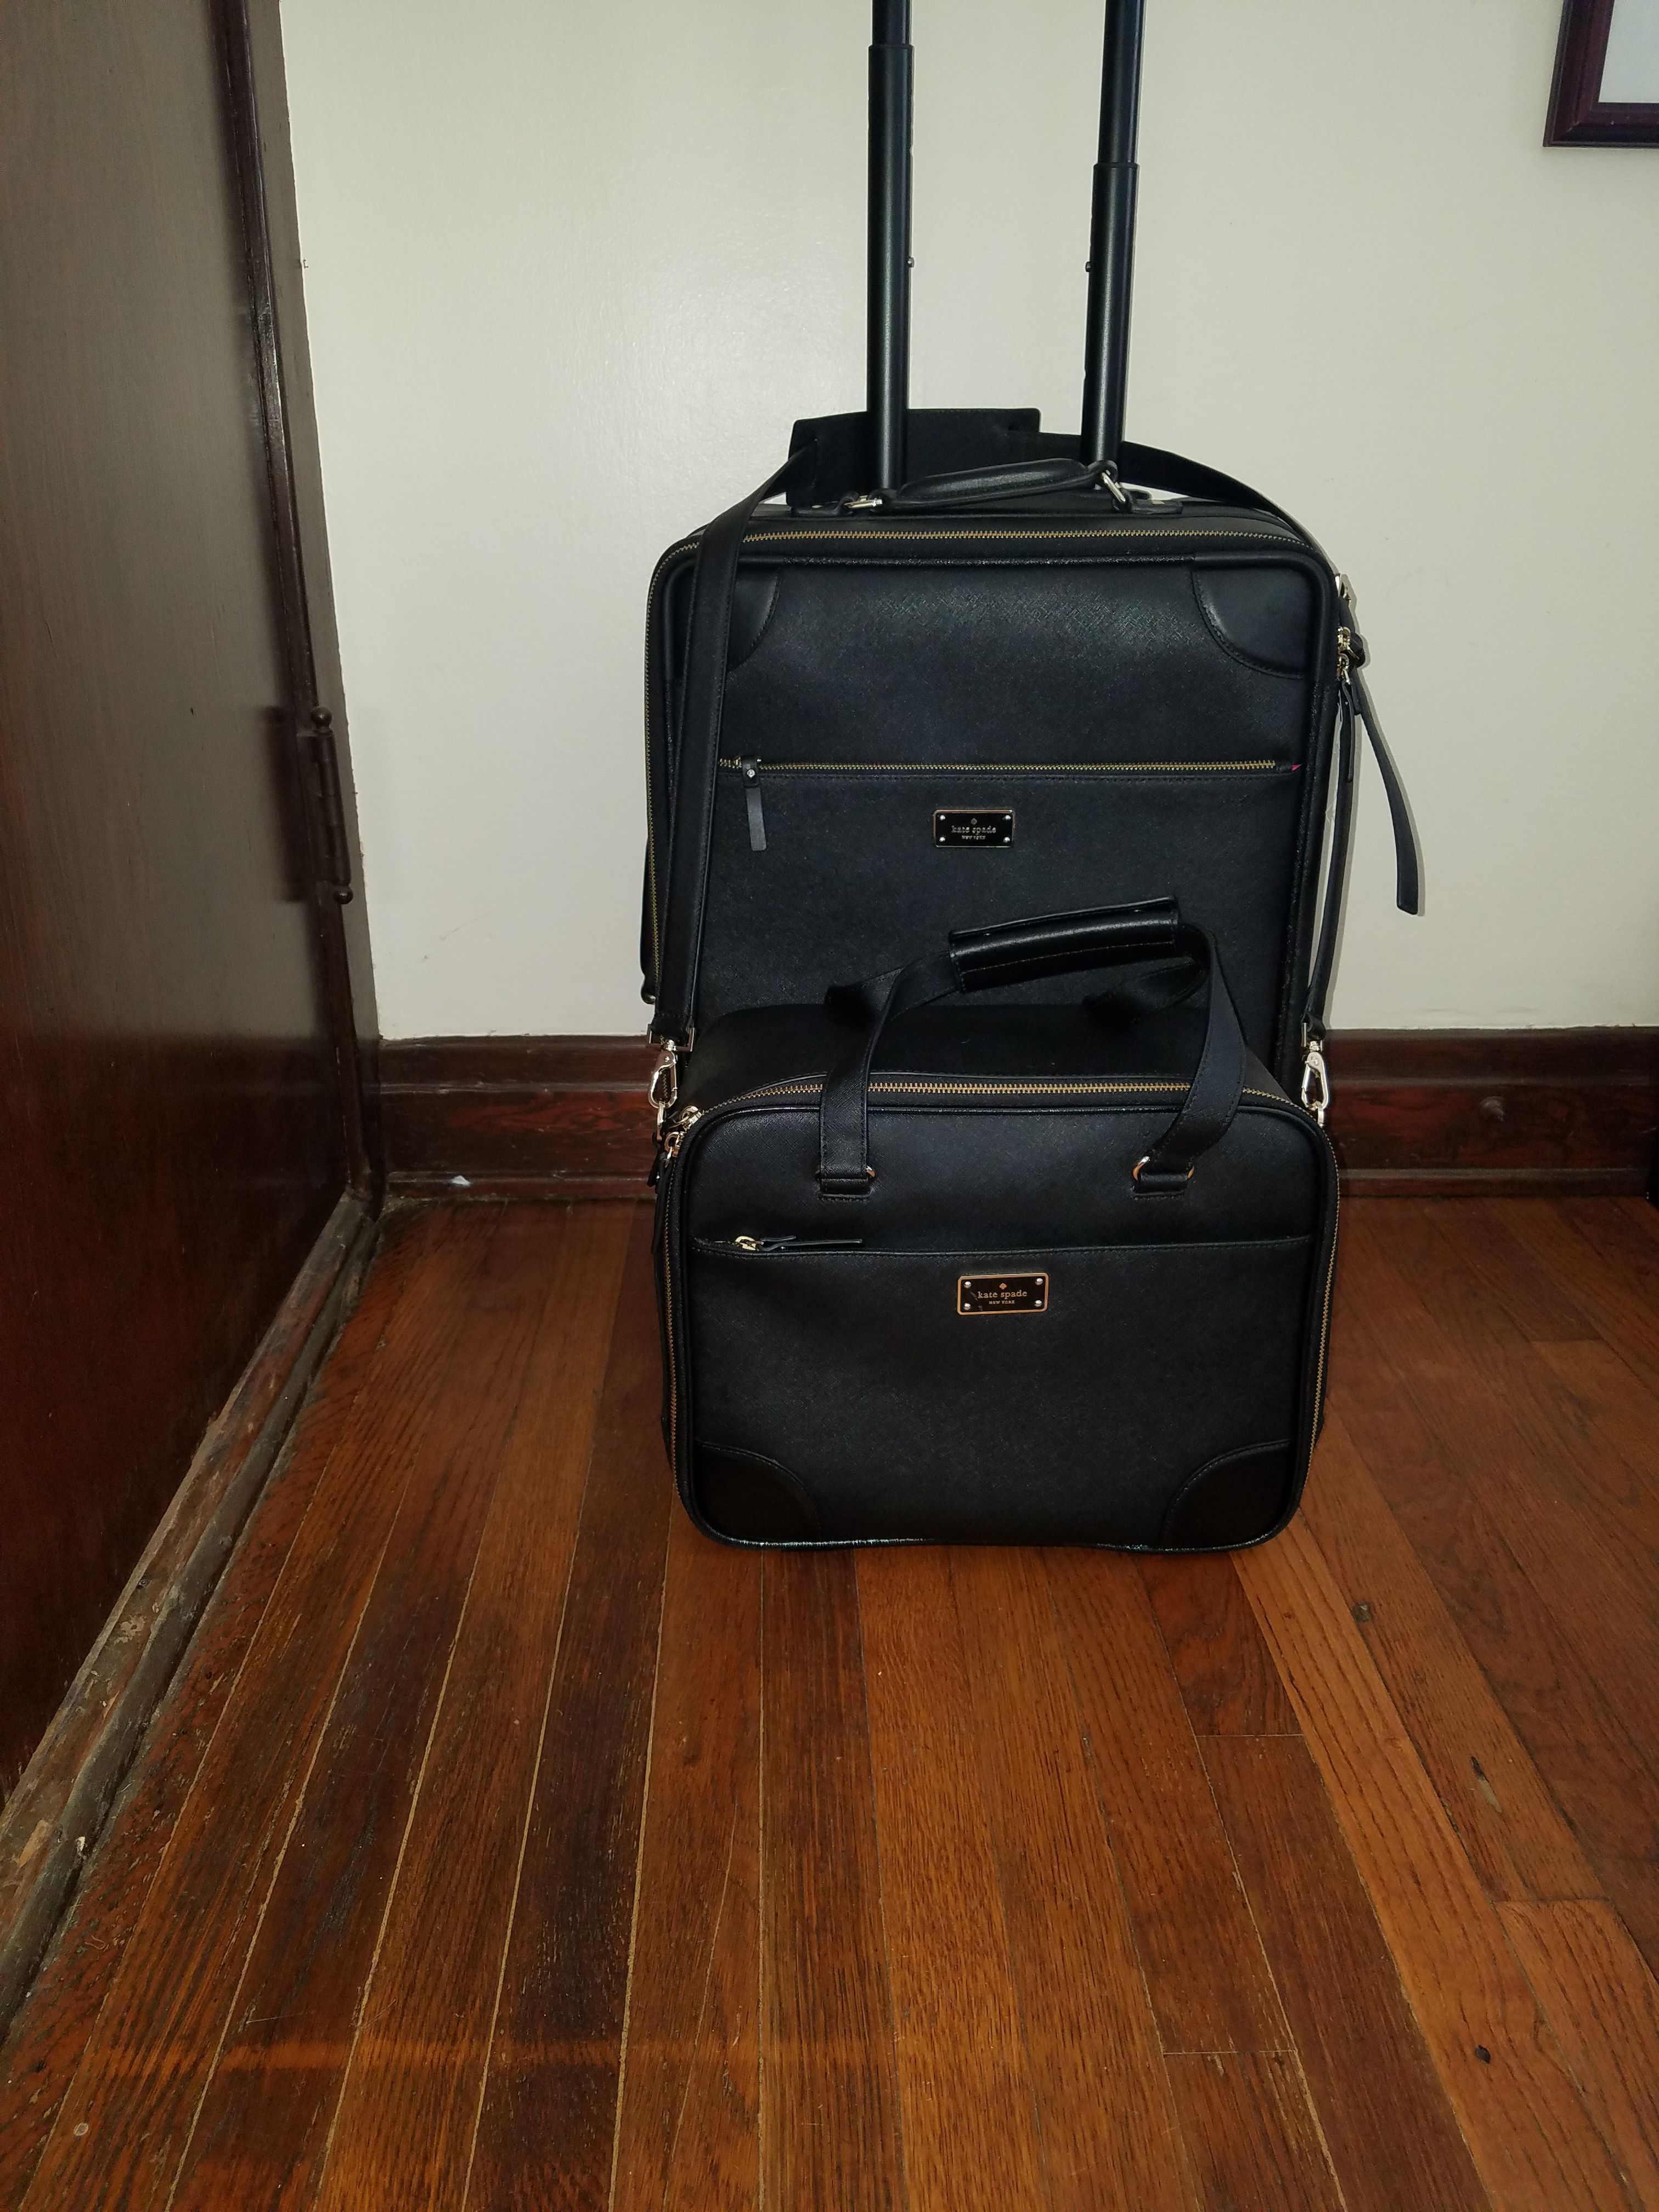 Kate spade luggage set for Sale in Anaheim, CA - OfferUp